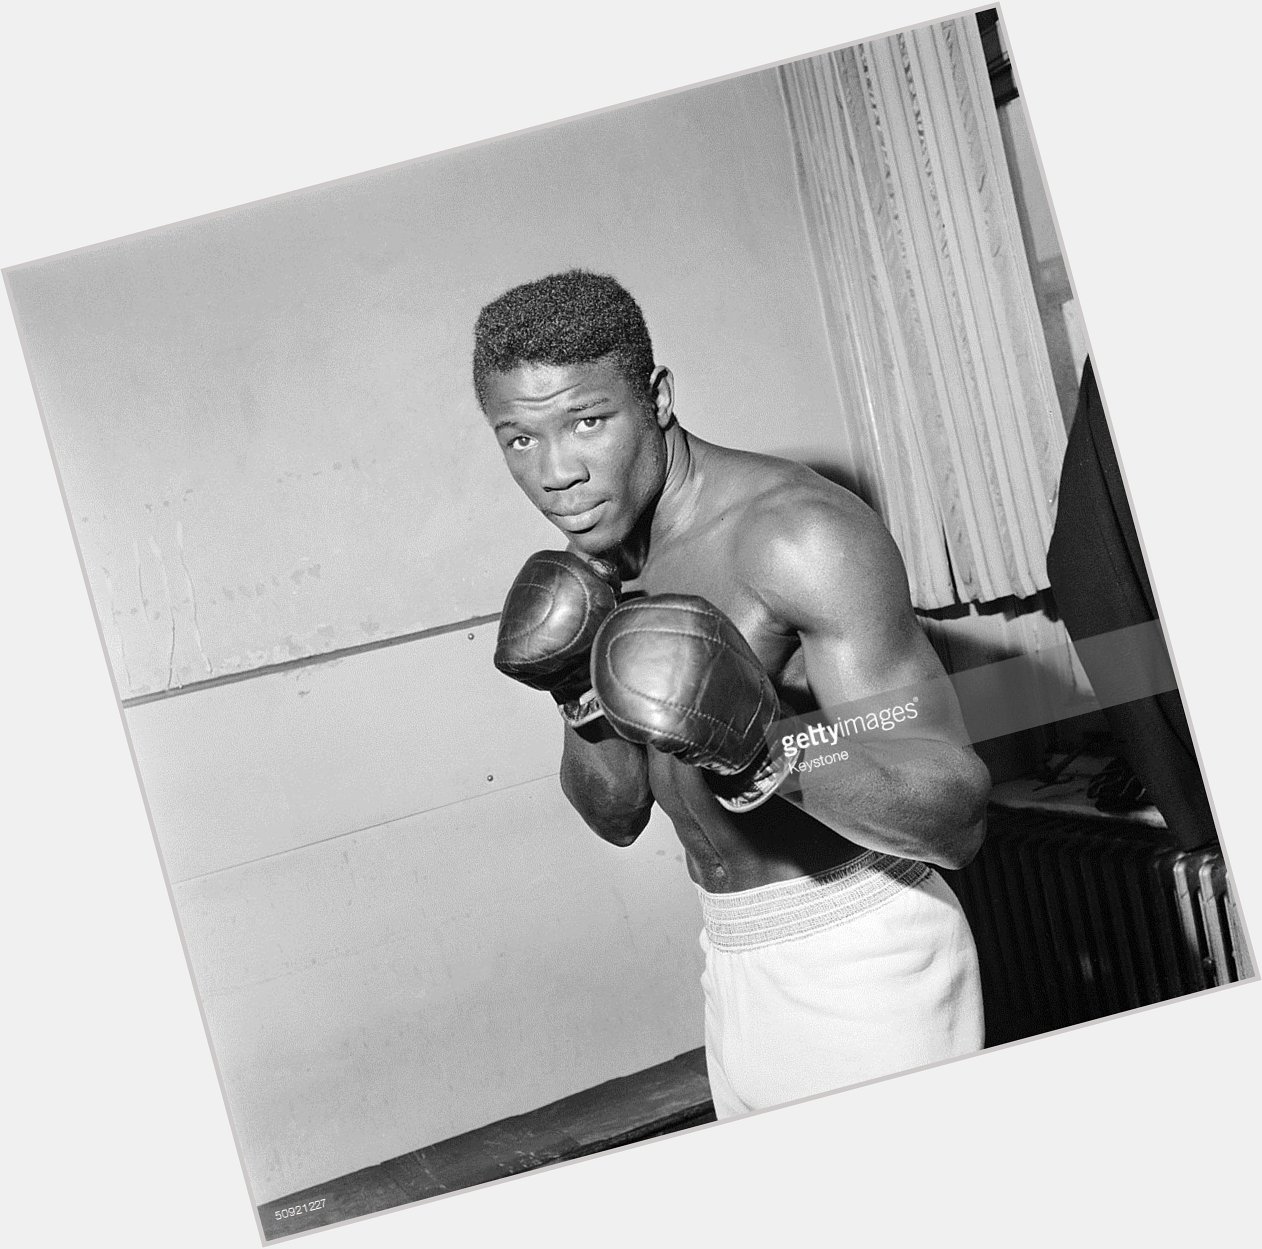 Happy Birthday to Emile Griffith, who would have turned 80 today! 